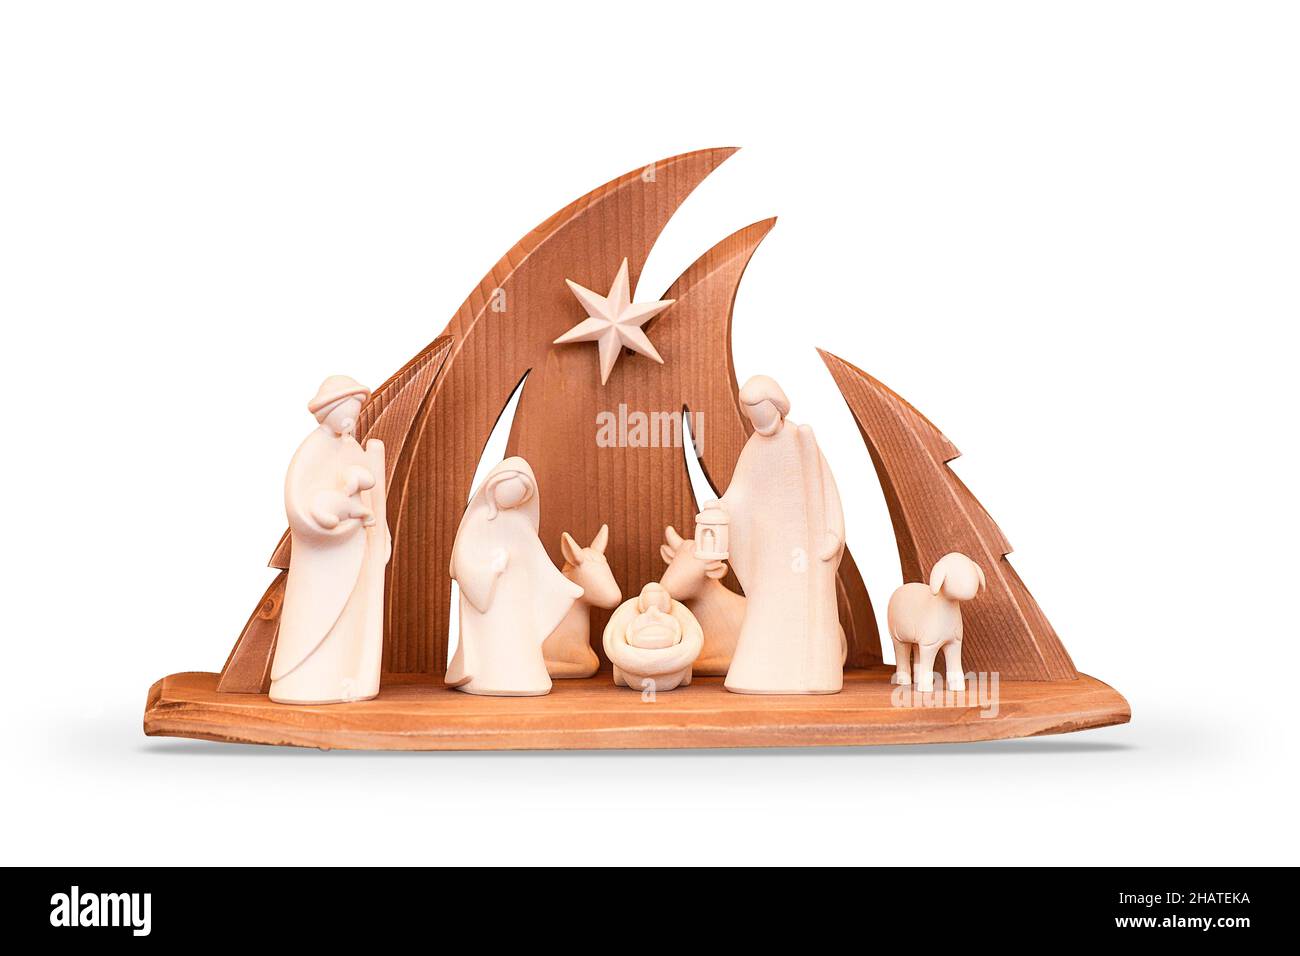 Nativity. Scene from ceramic or wooden figurines of the Nativity. Christmas composition. Stock Photo